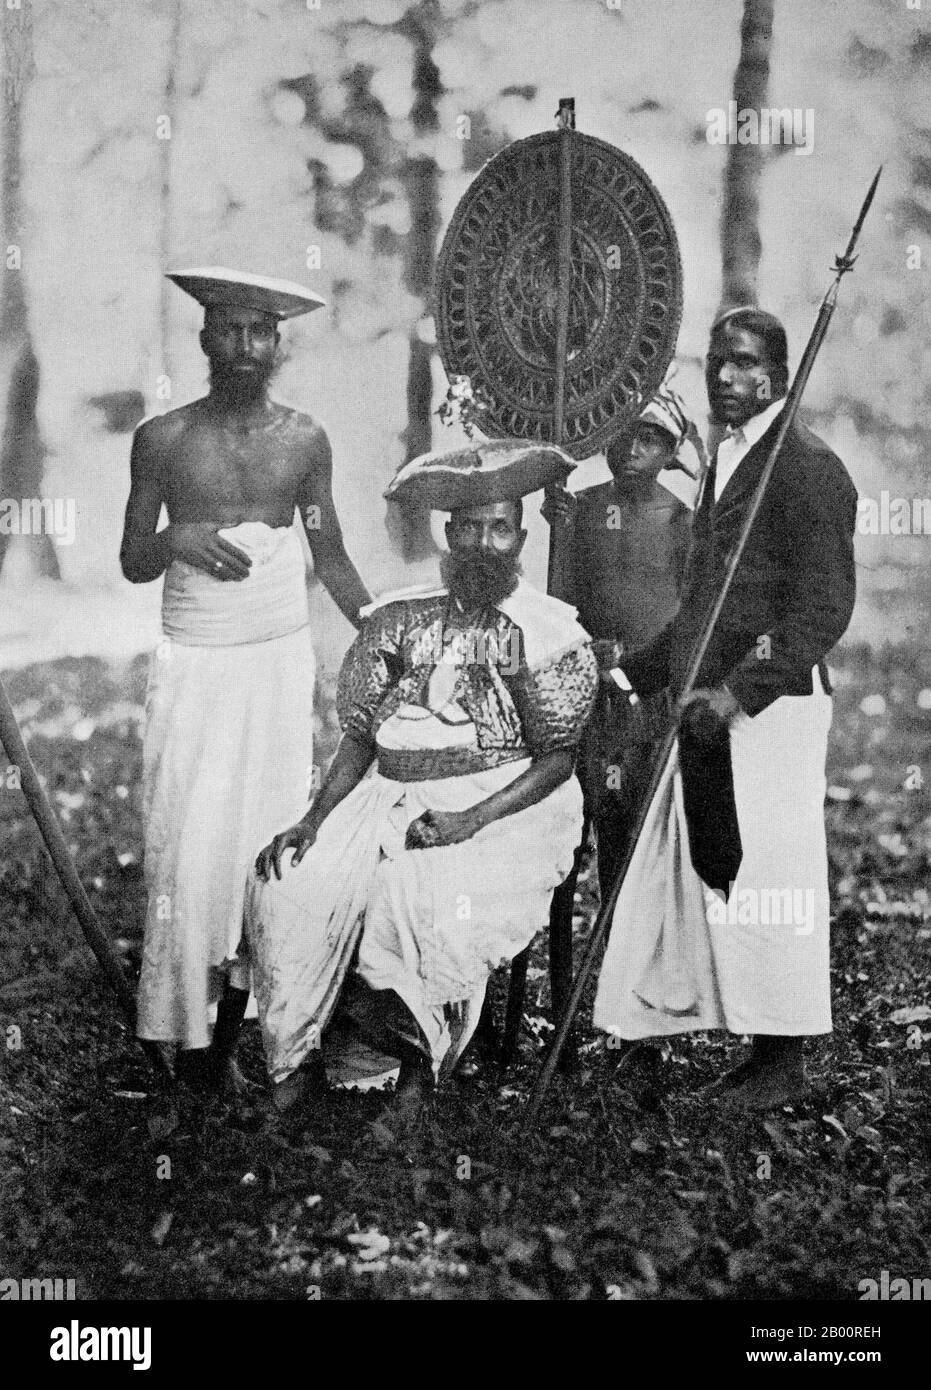 Sri Lanka: A Kandyan chief with his retainers. Photograph by Charles T. Scowen (1852-1948), c. 1870s.  Charles Thomas Scowen (11 March 1852 - 24 November 1948) was a British photographer active during the late nineteenth century, primarily from 1871-1890. He worked out of Sri Lanka and British India with his own established studio, Scowen & Co. His first studio was in Kandy, but he had opened a second in Colombo by the 1890s. His photos were famed for their lighting, strong compositional qualities and technically superior printing. Stock Photo